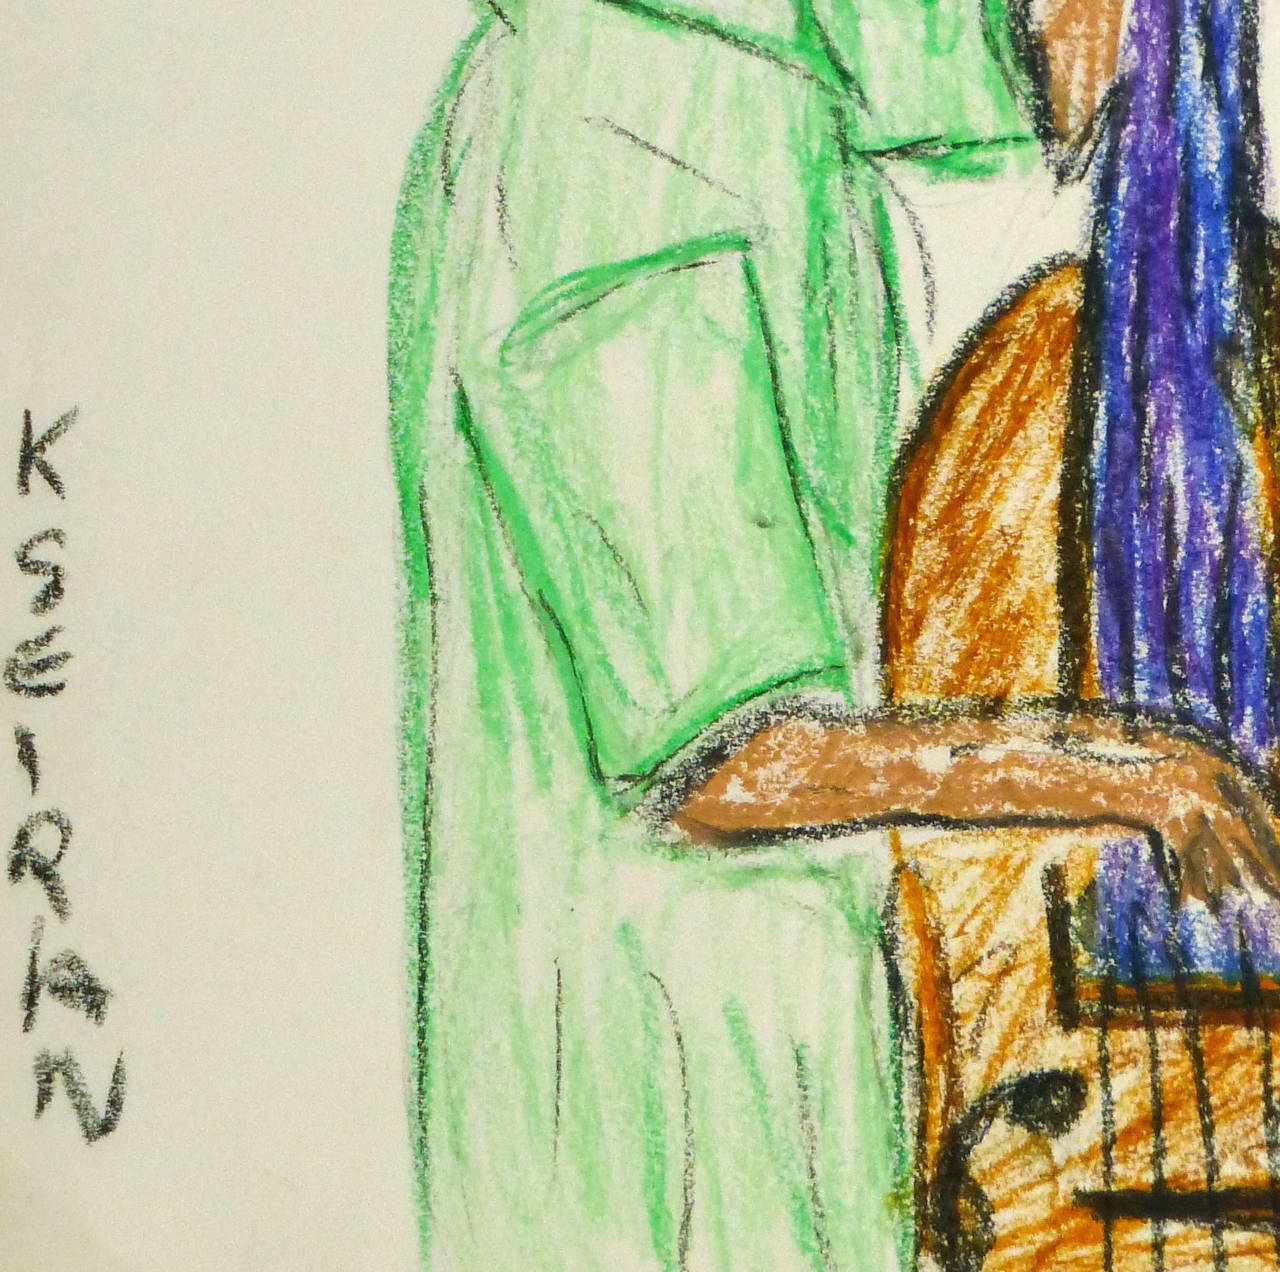 French Oil Pastel - The Bassist - Art by Kseiran